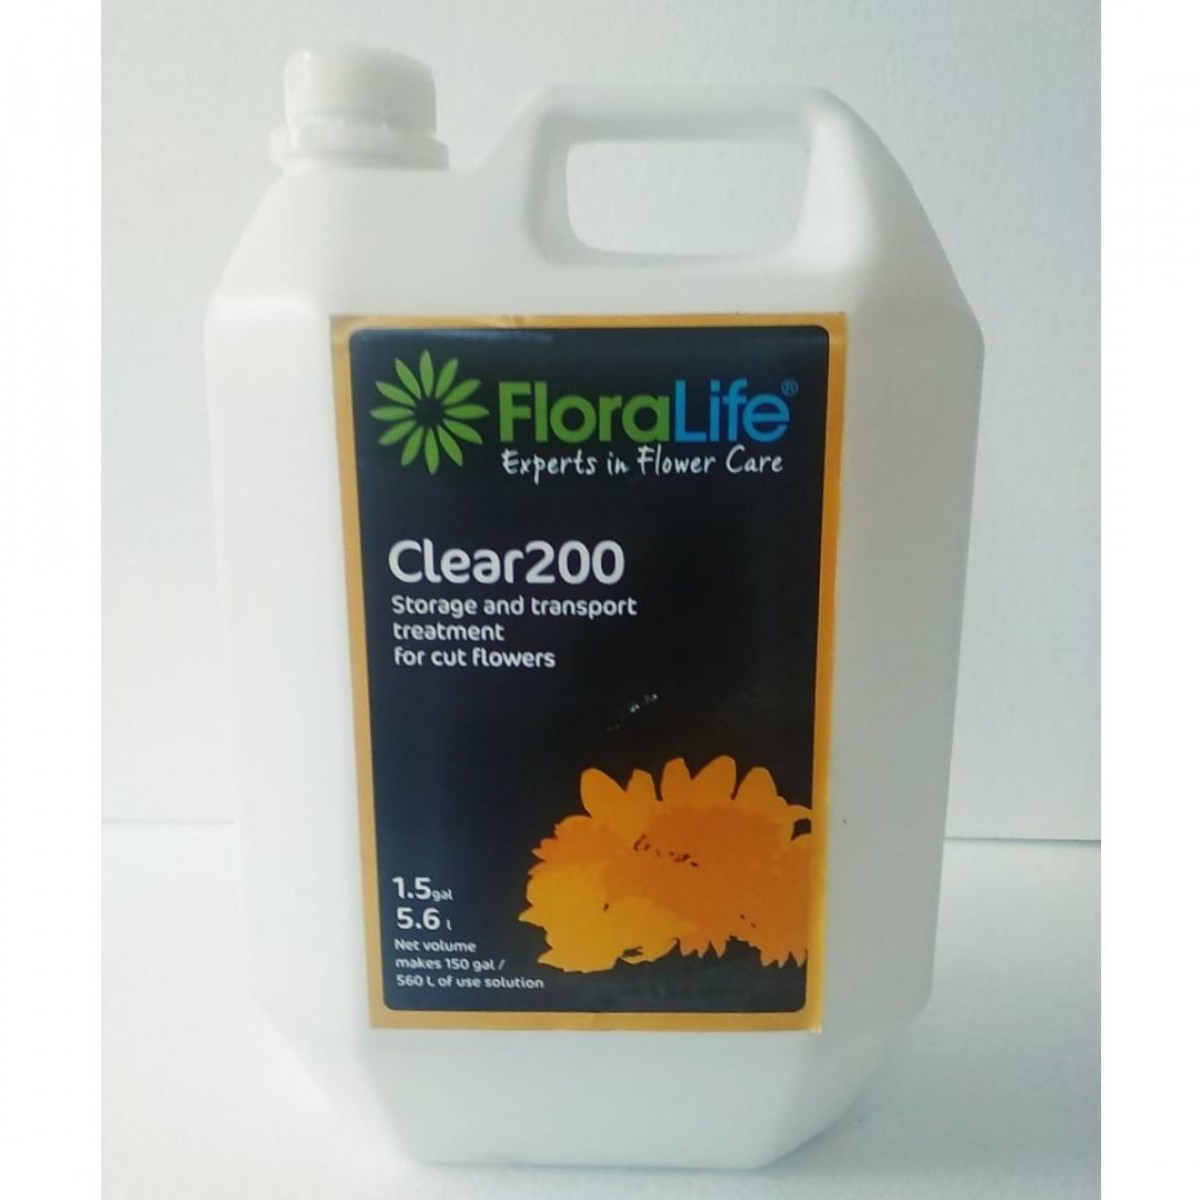 1202 Floralife Clear 200 5.67Ltr - 1 No